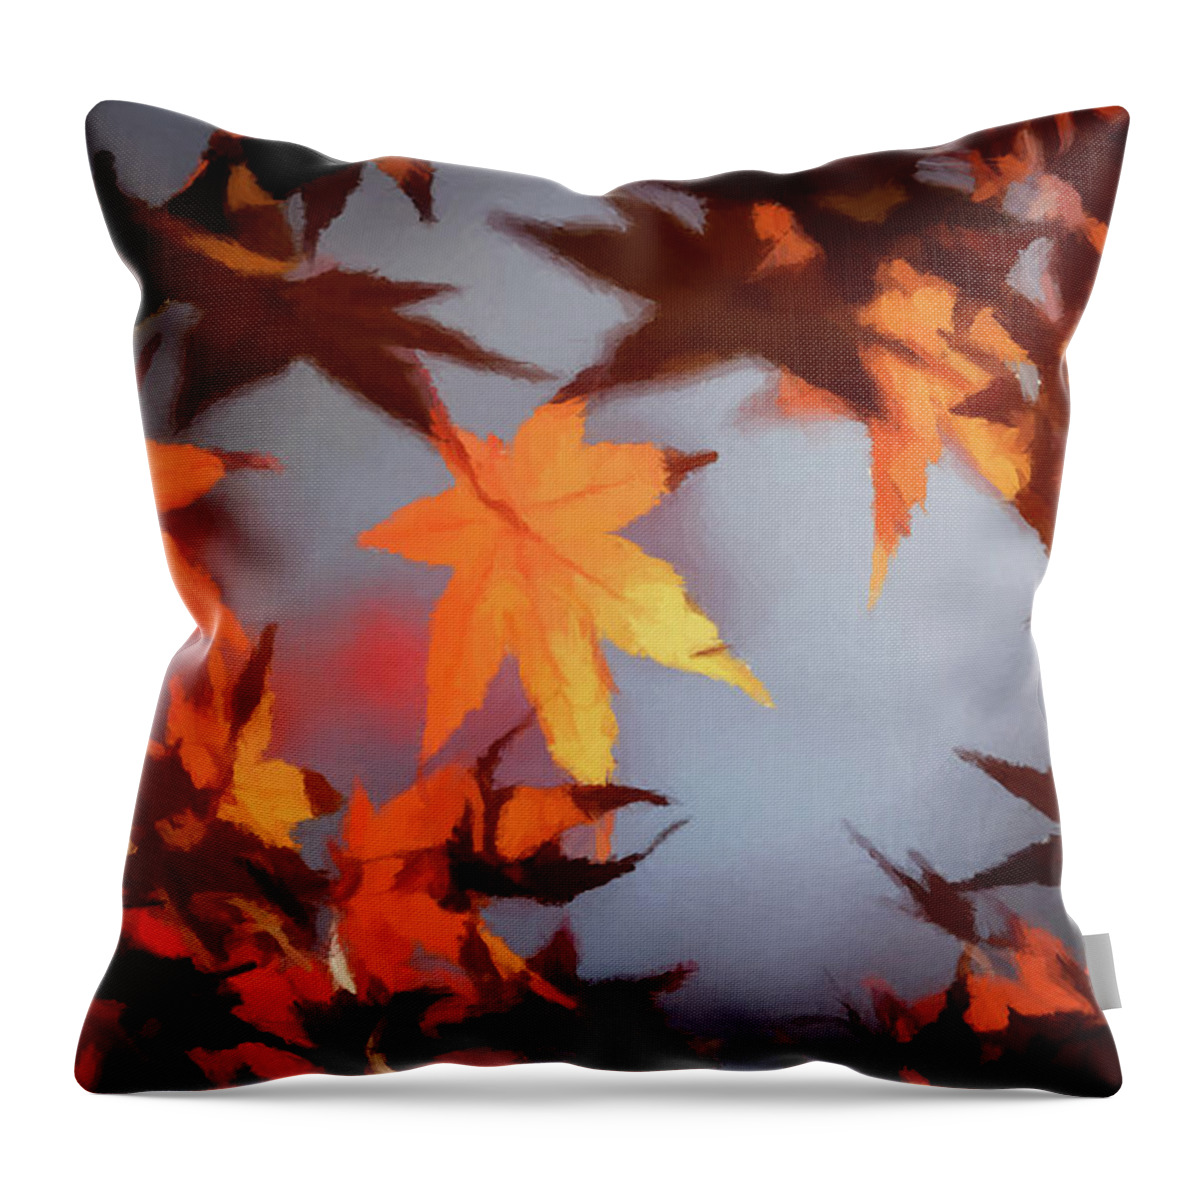 Autumn Throw Pillow featuring the photograph Autumn Leaves by David Dehner